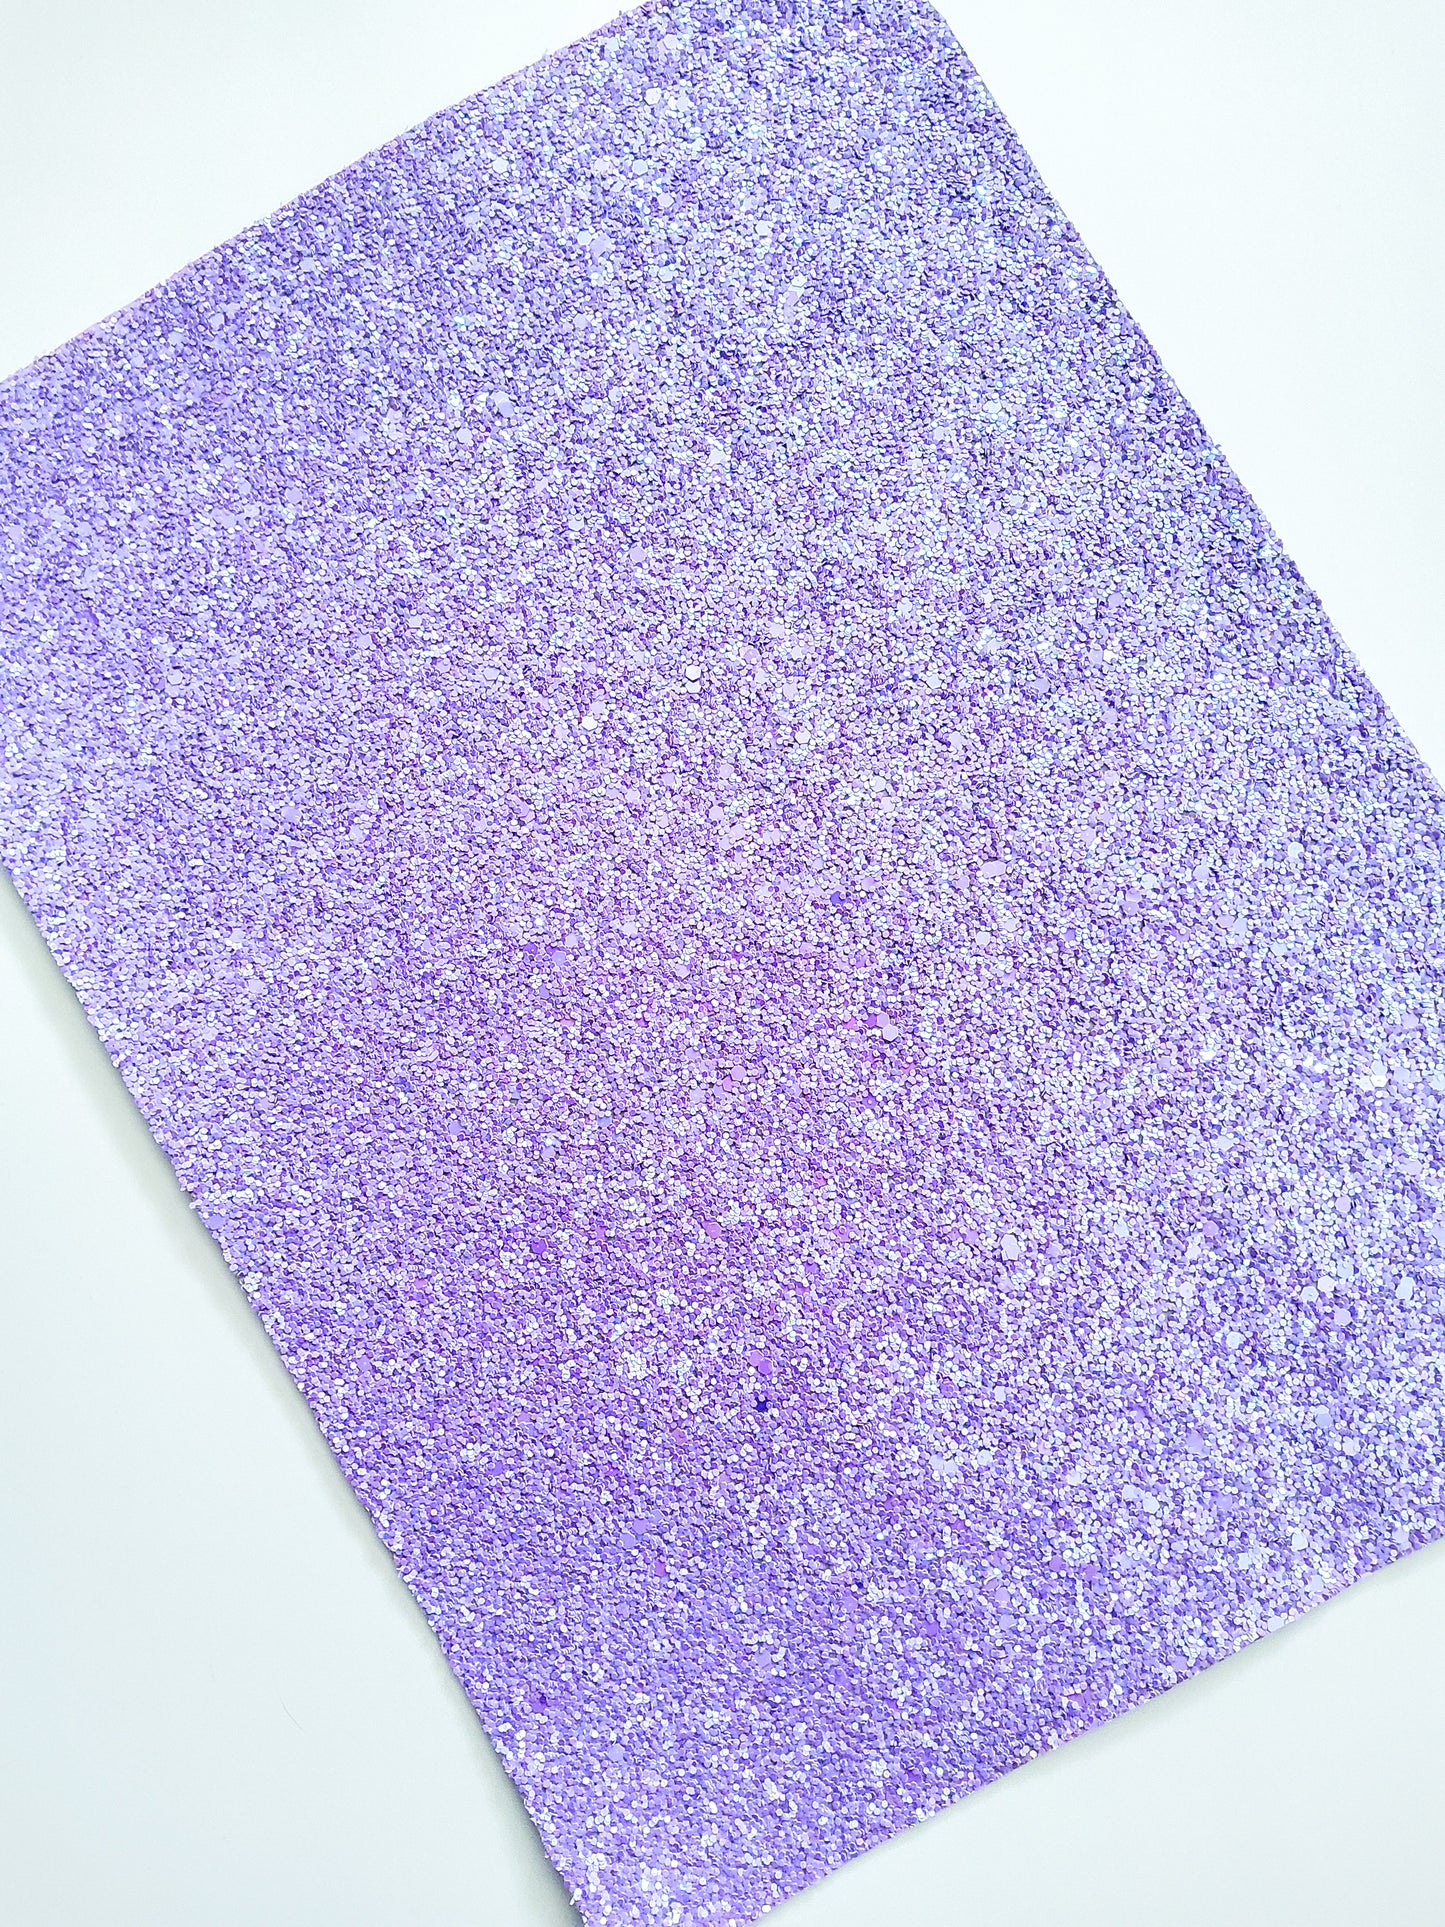 Lilac Chunky Glitter 9x12 faux leather sheet